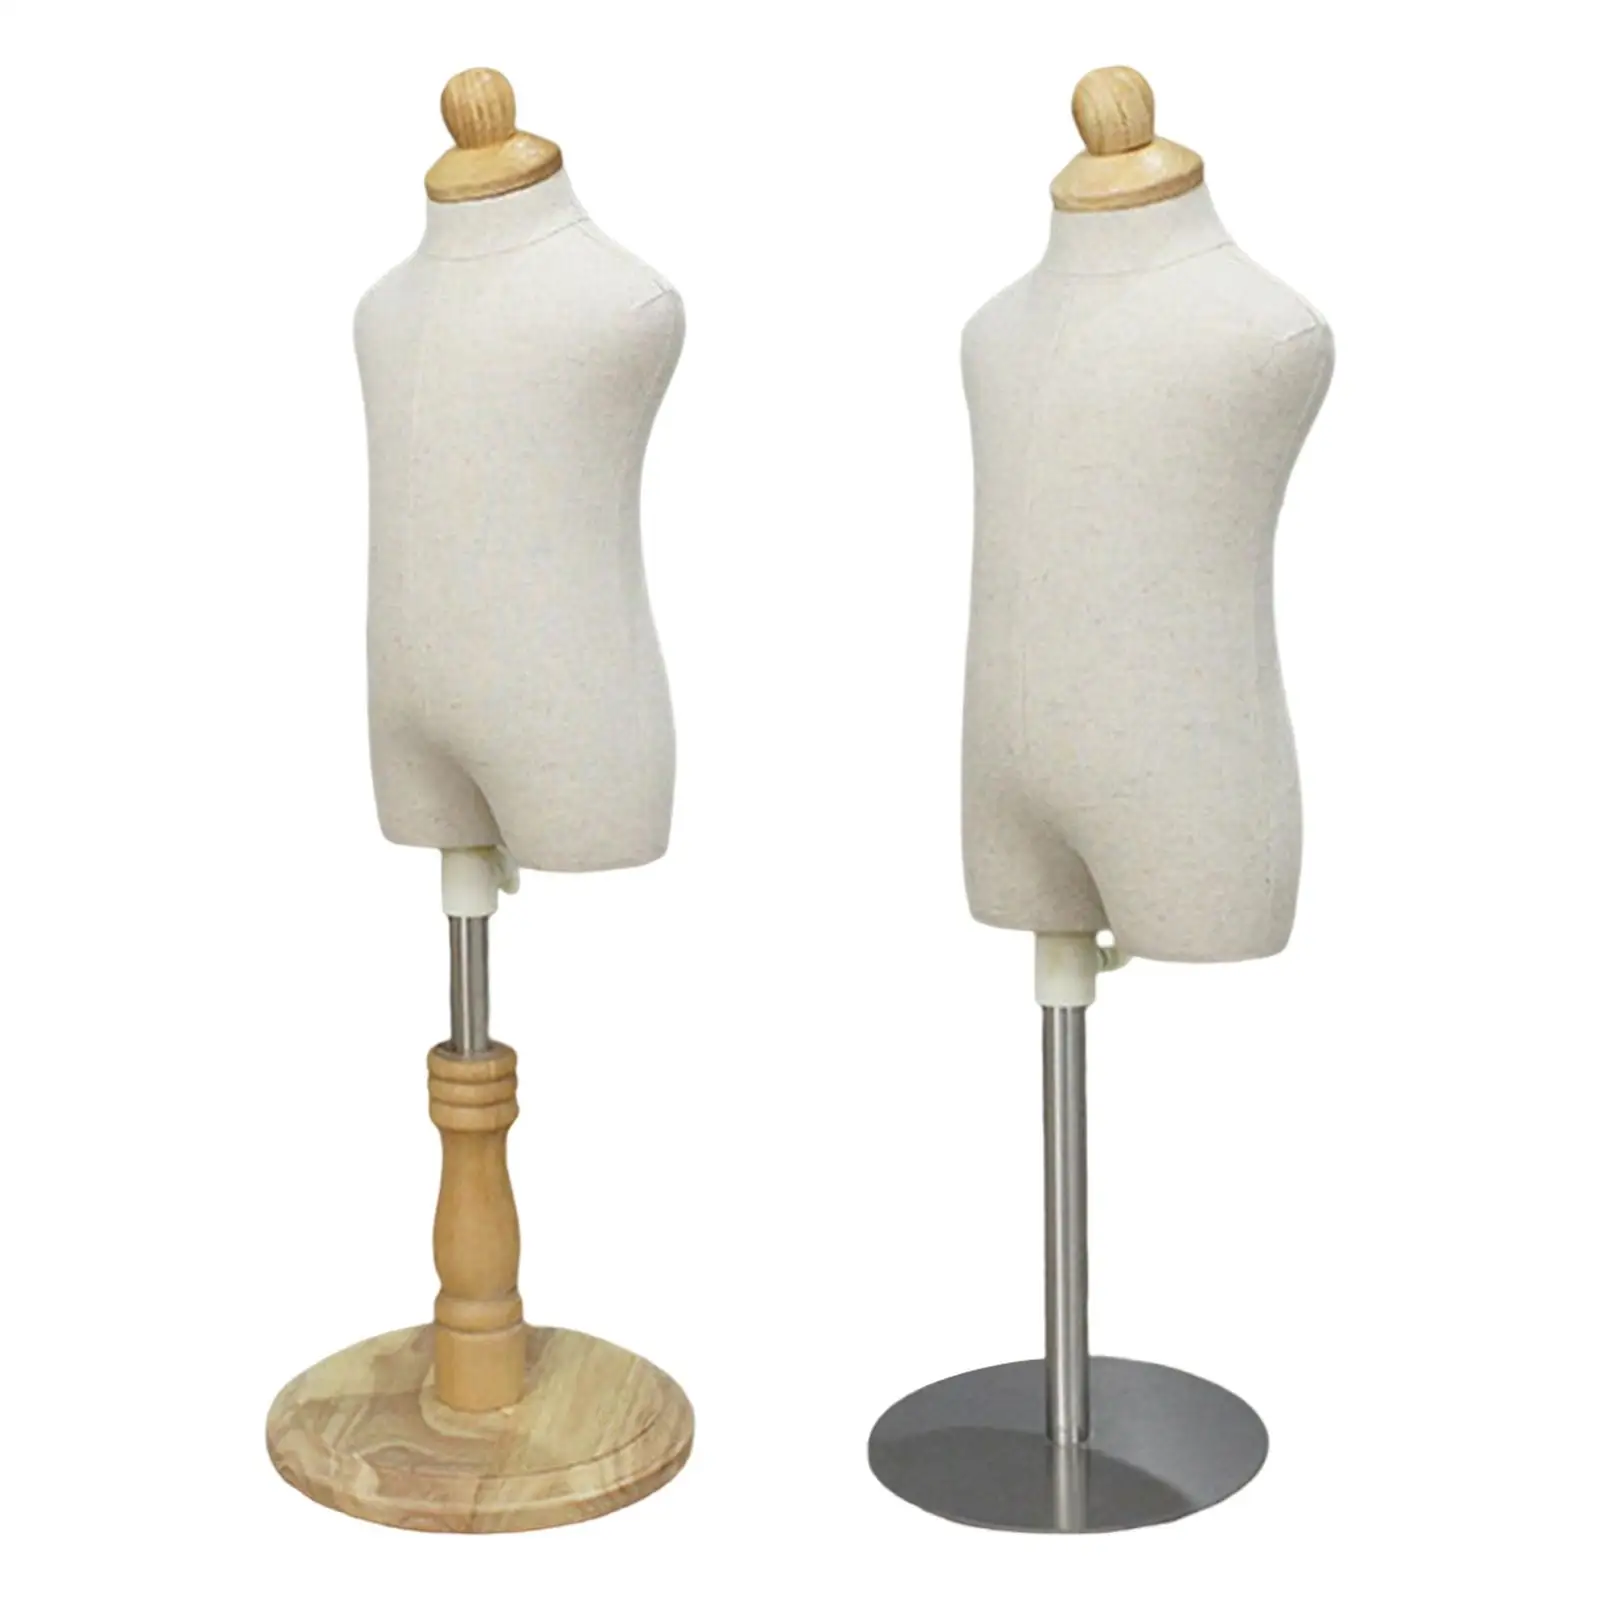 Dress Form Mannequin Torso Seamstress Stand Display for 4 & 2 Years Old 